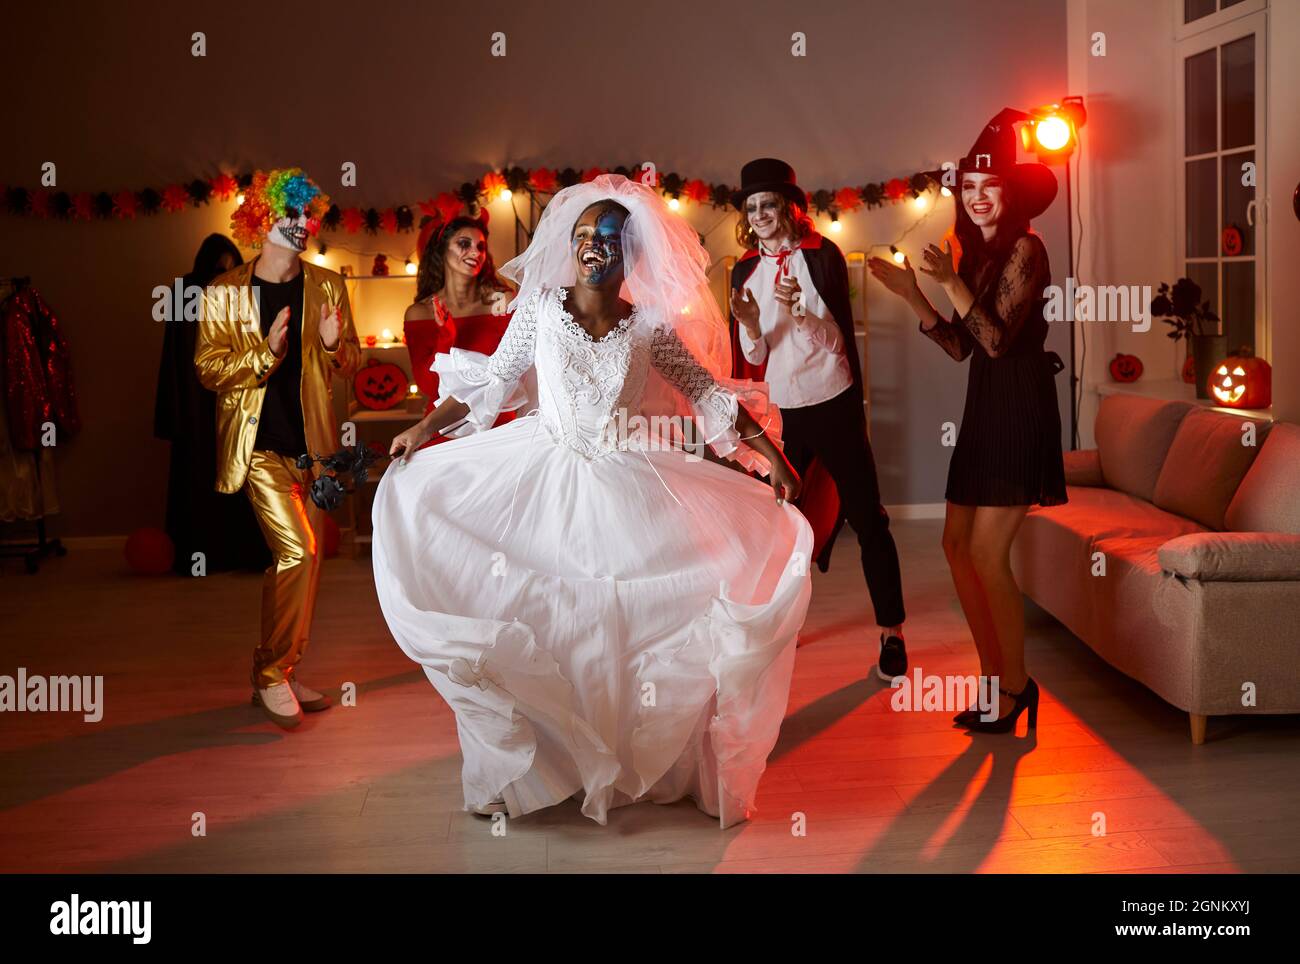 https://c8.alamy.com/comp/2GNKXYJ/cheerful-young-african-american-woman-in-dead-bride-costume-dancing-having-fun-at-halloween-party-2GNKXYJ.jpg